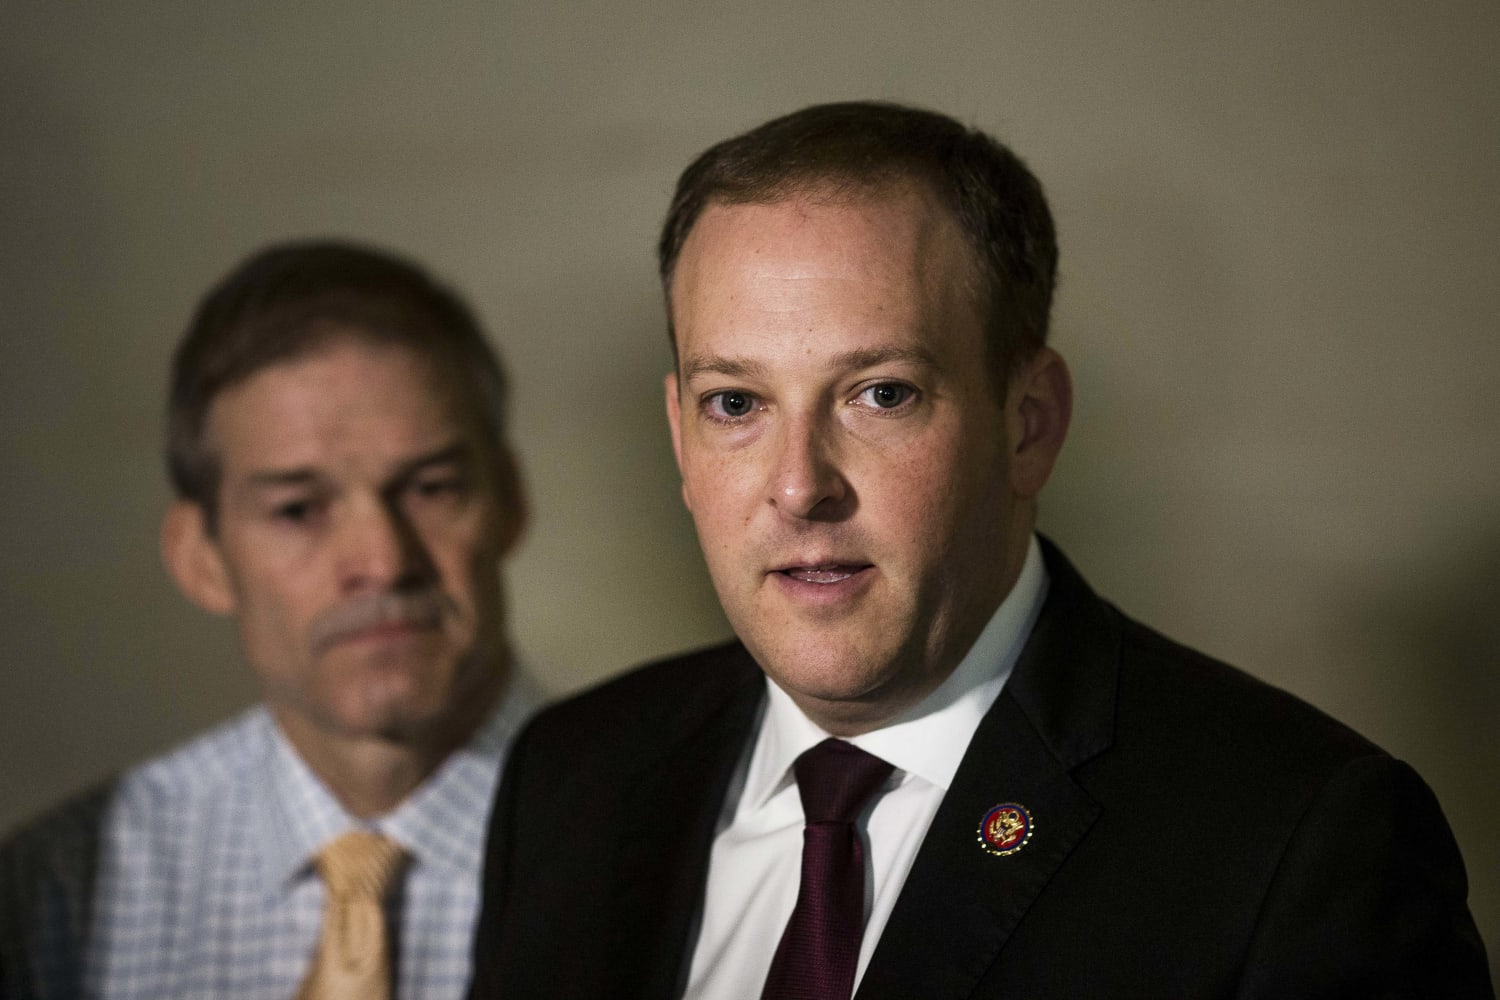 Rep. Lee Zeldin says daughters 'shaken' after shooting outside home